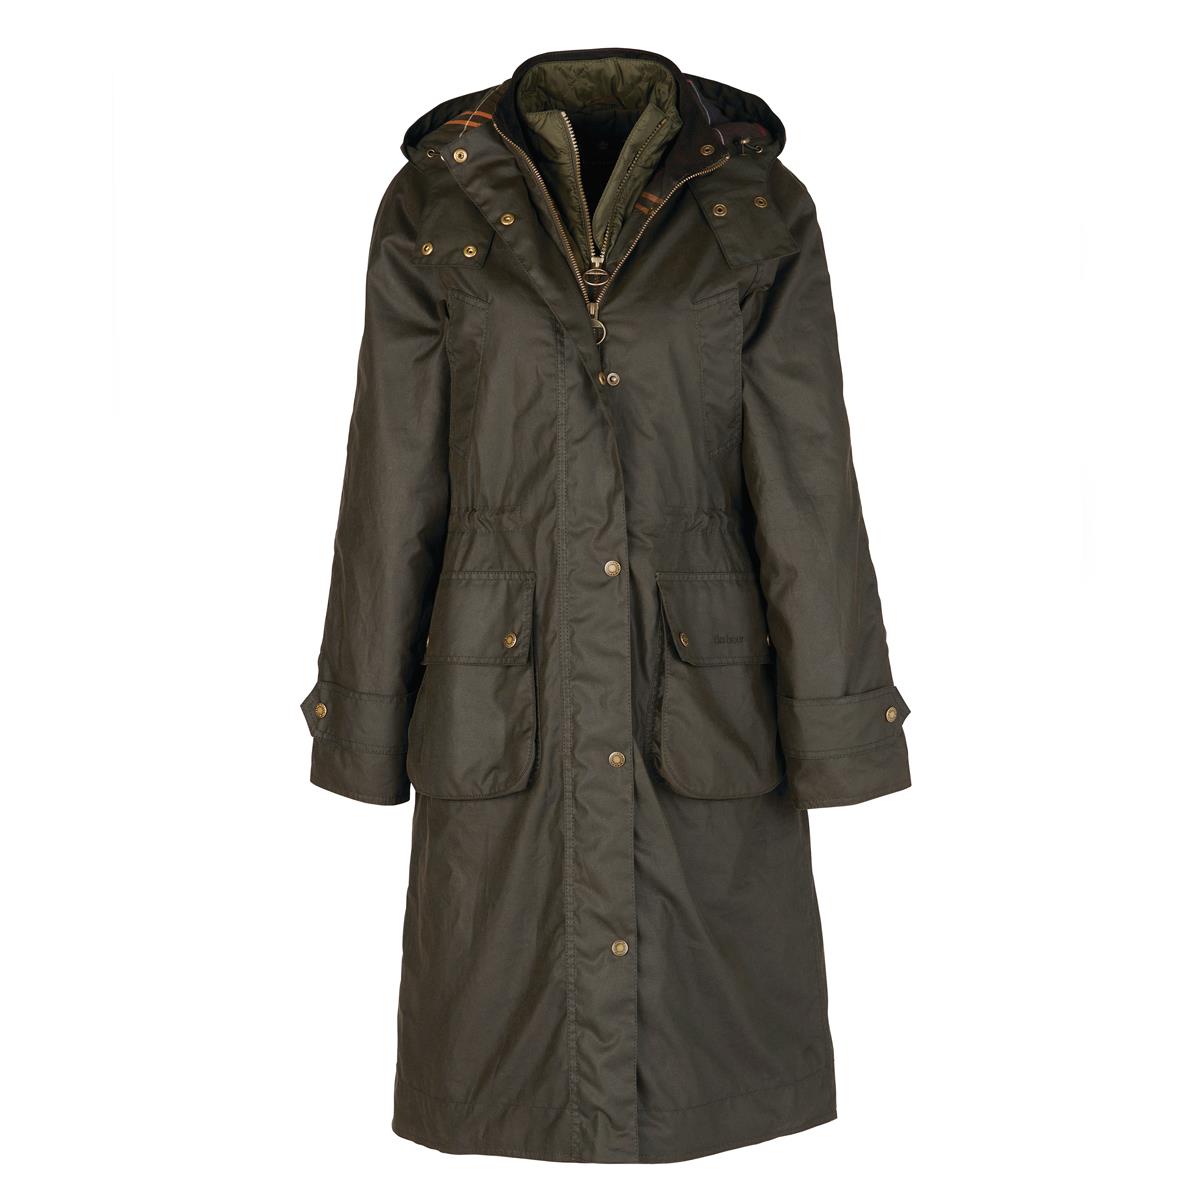 Does the Barbour Cannich Wax Jacket have light insulation?